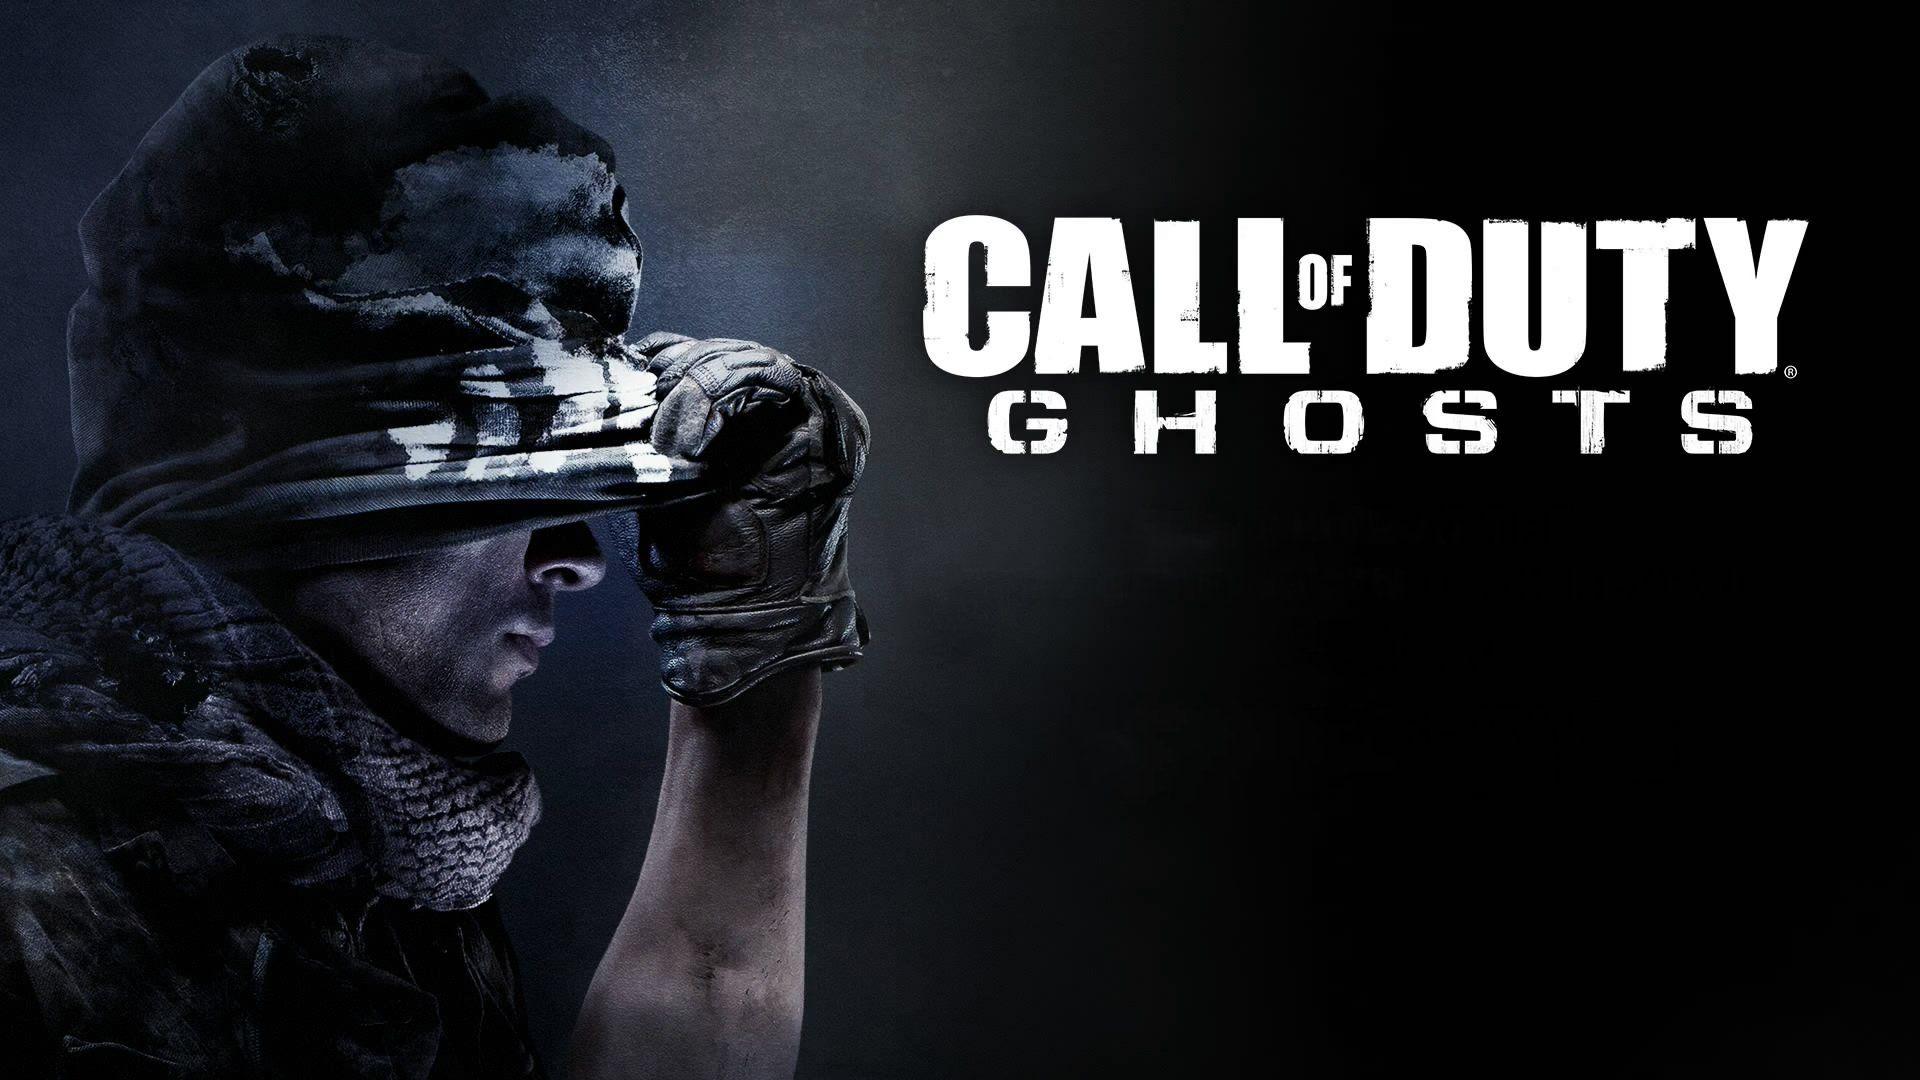 Call of Duty Ghosts Wallpaper 4 X 1080